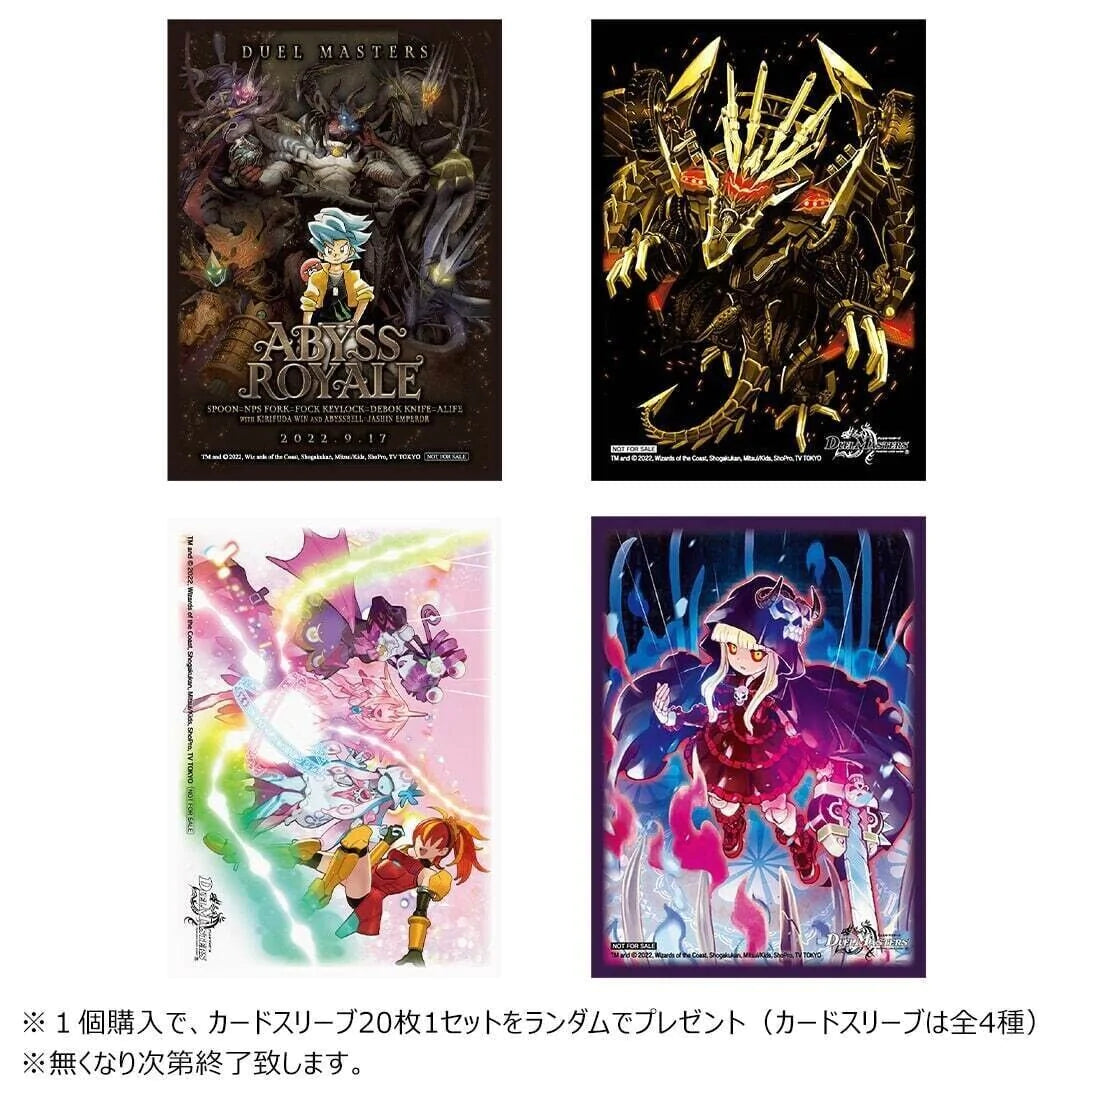 Duel Masters TCG &quot;Legendary Evil God&quot; Invitation from the Abyss [DM22-SP1] (Japanese)-Takara Tomy-Ace Cards &amp; Collectibles